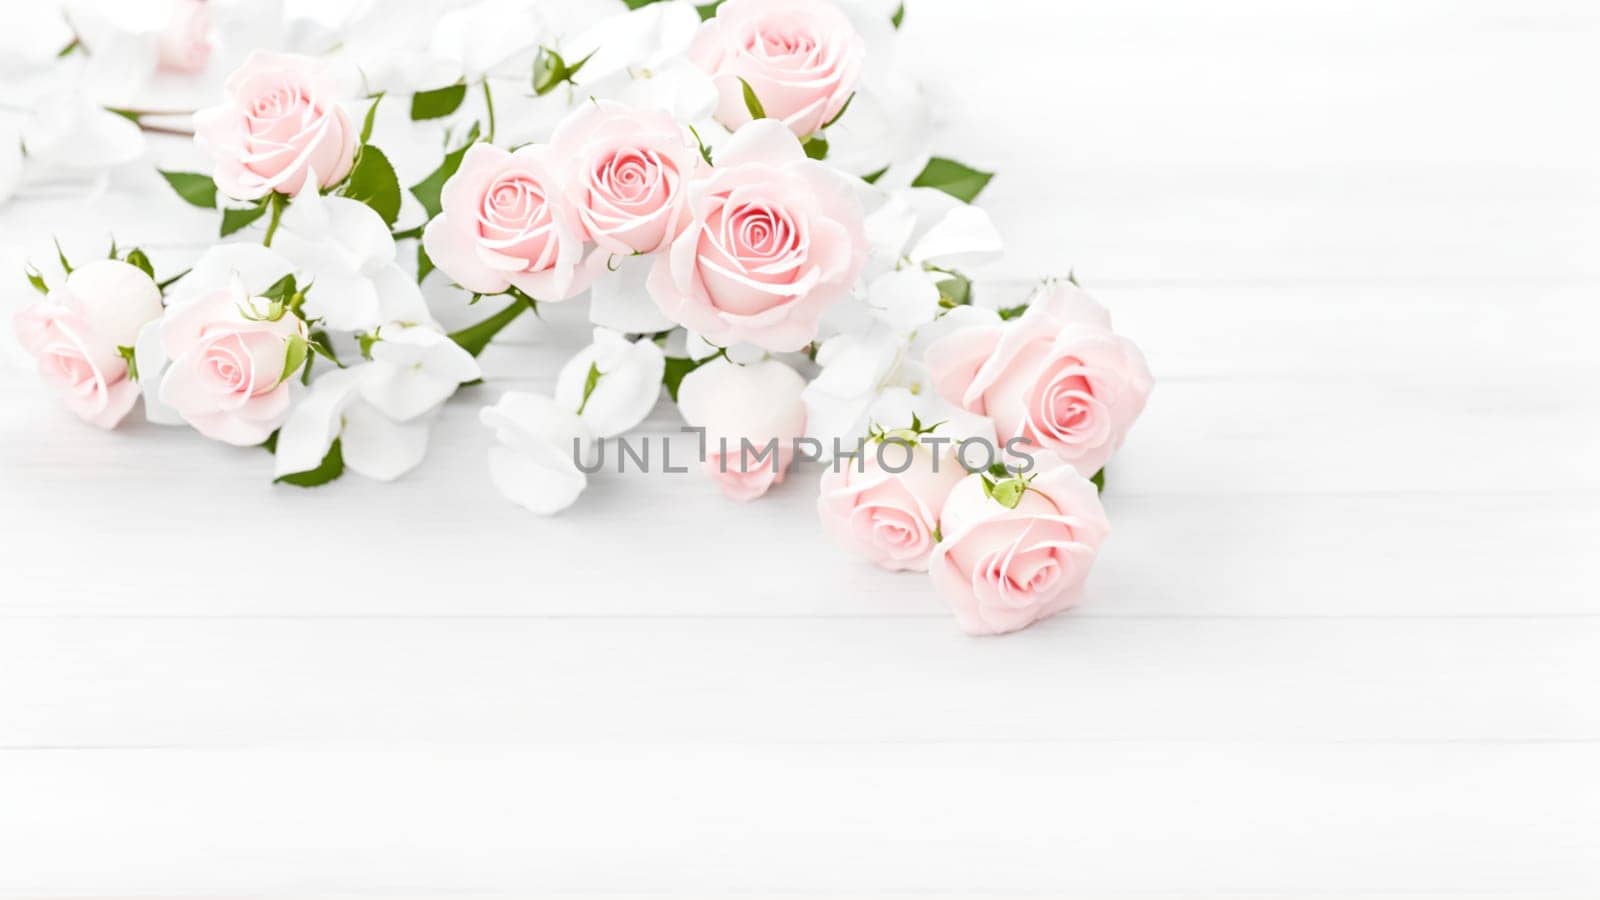 Pretty background with roses on a white wooden table. by XabiDonostia